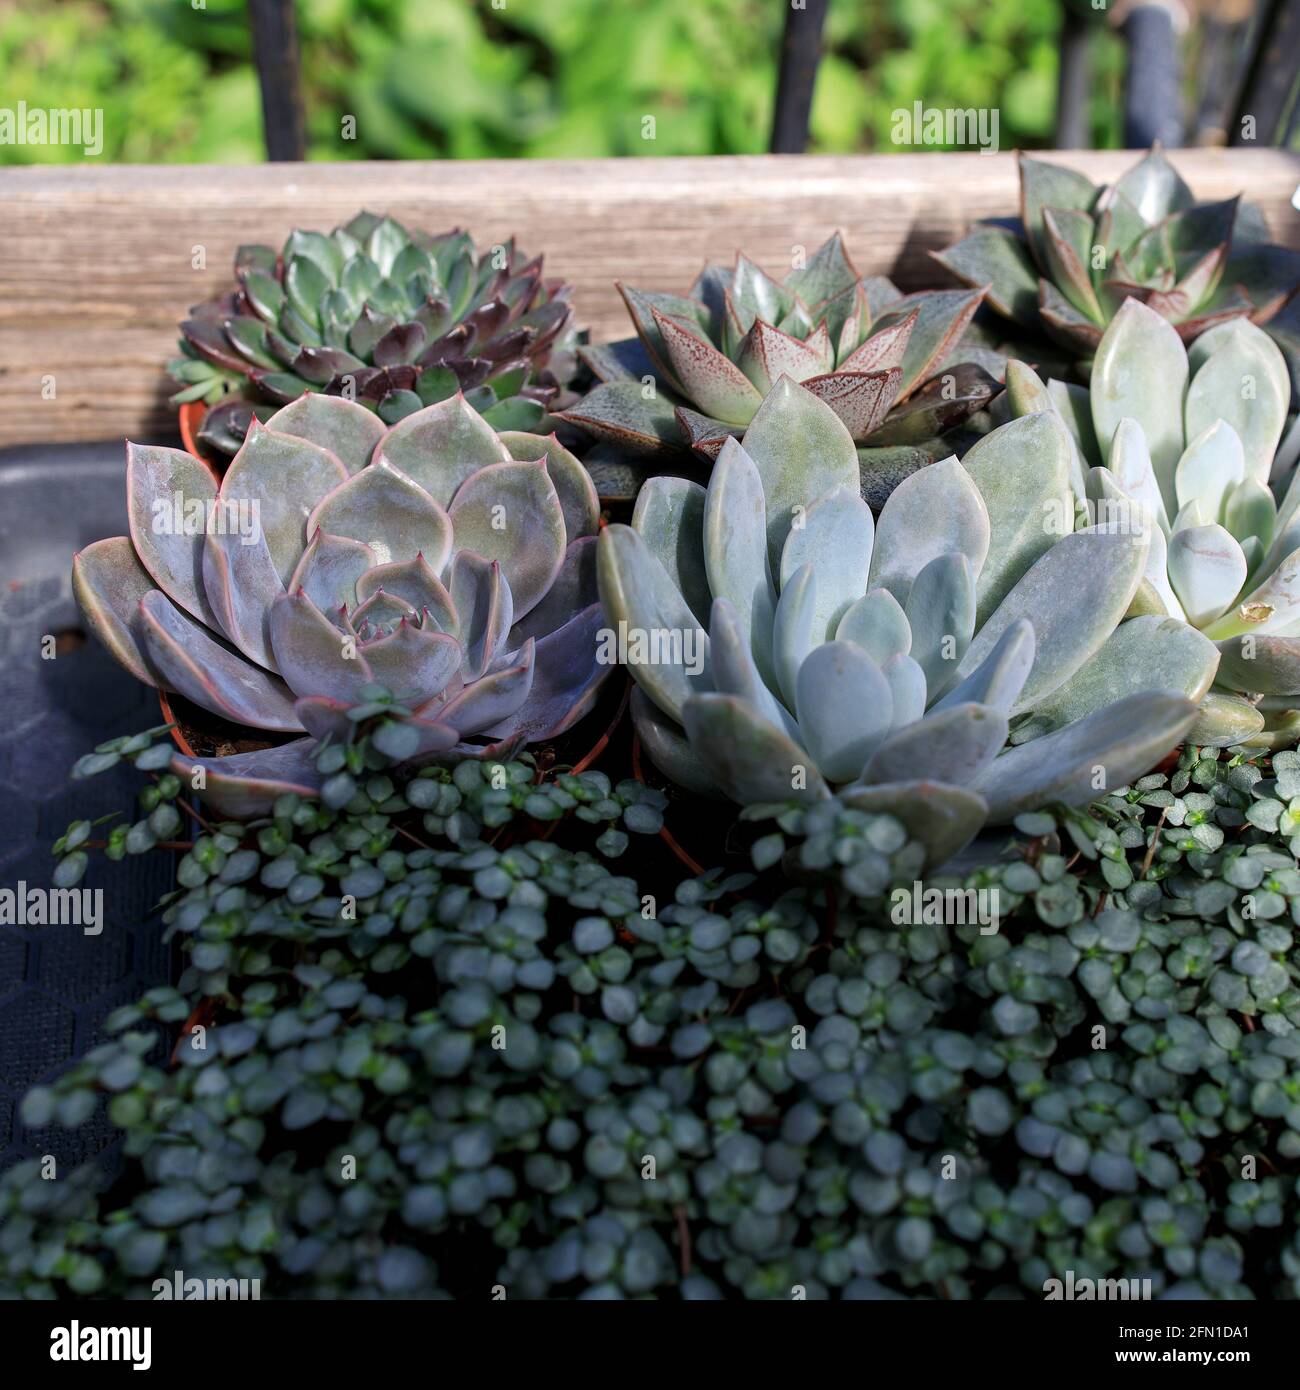 Pilea glaucophylla Greyzy and Echeveria for sale for decoration of interior Stock Photo